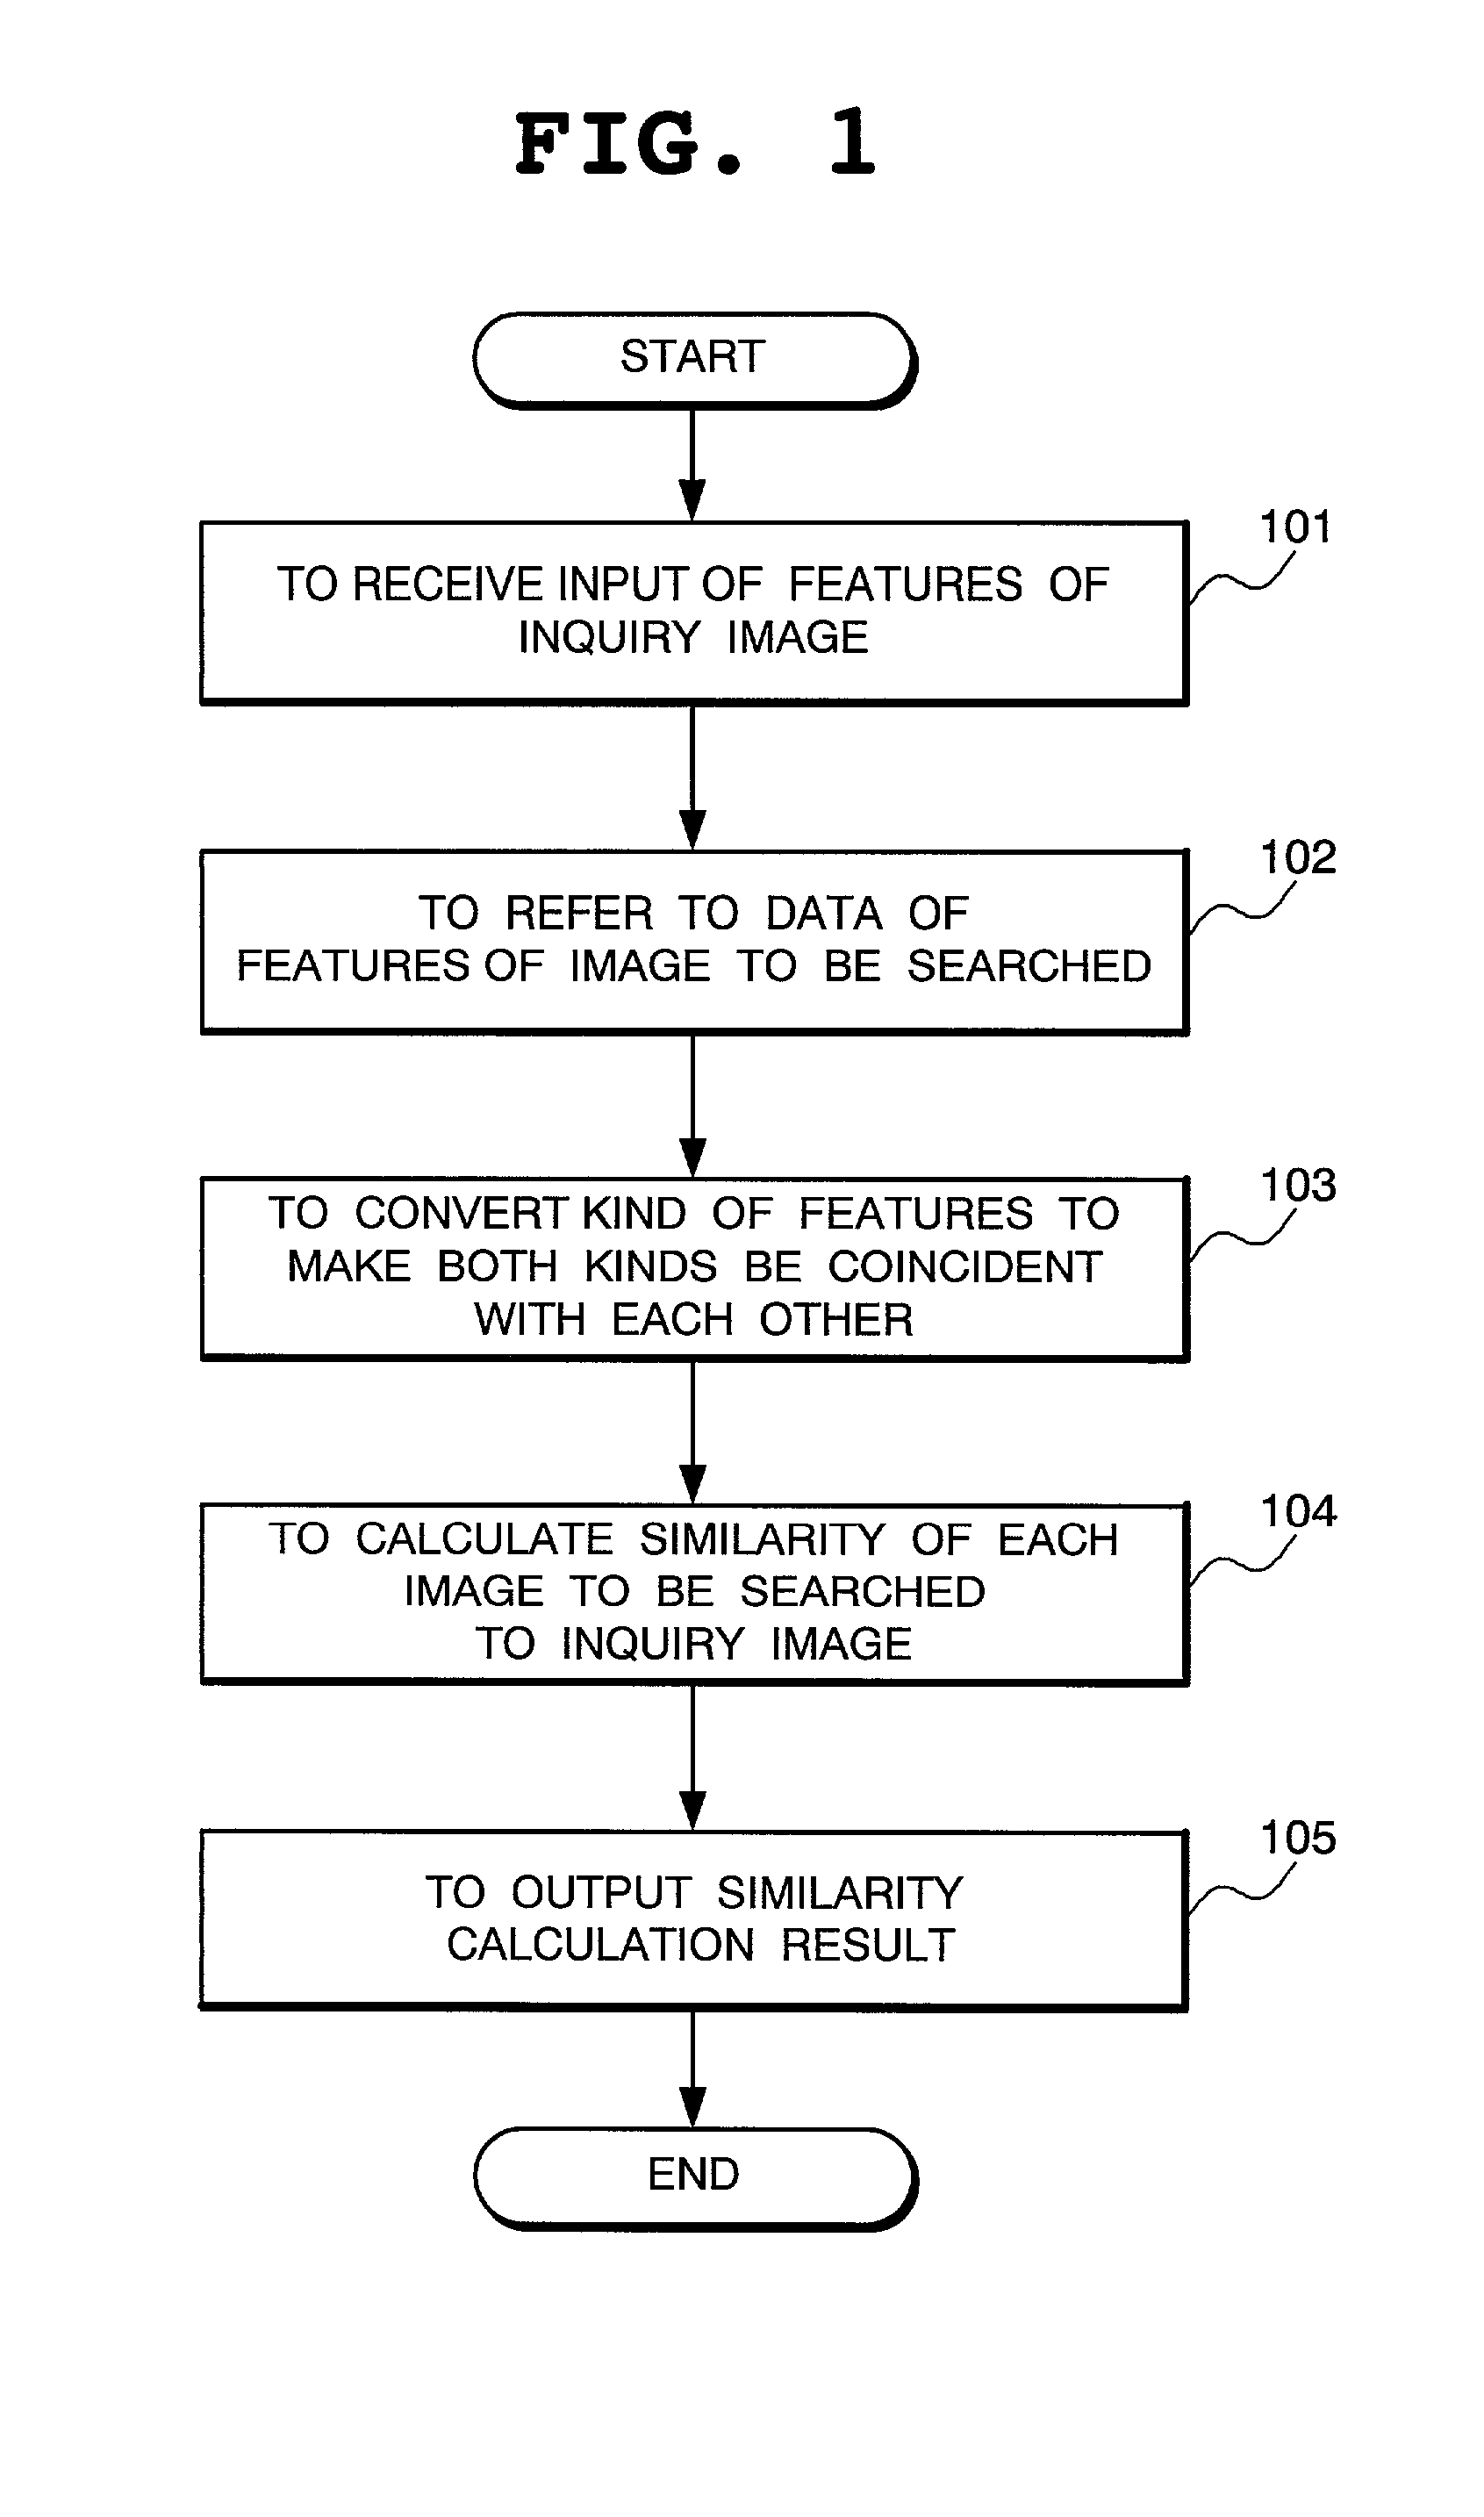 Image search system and image search method thereof